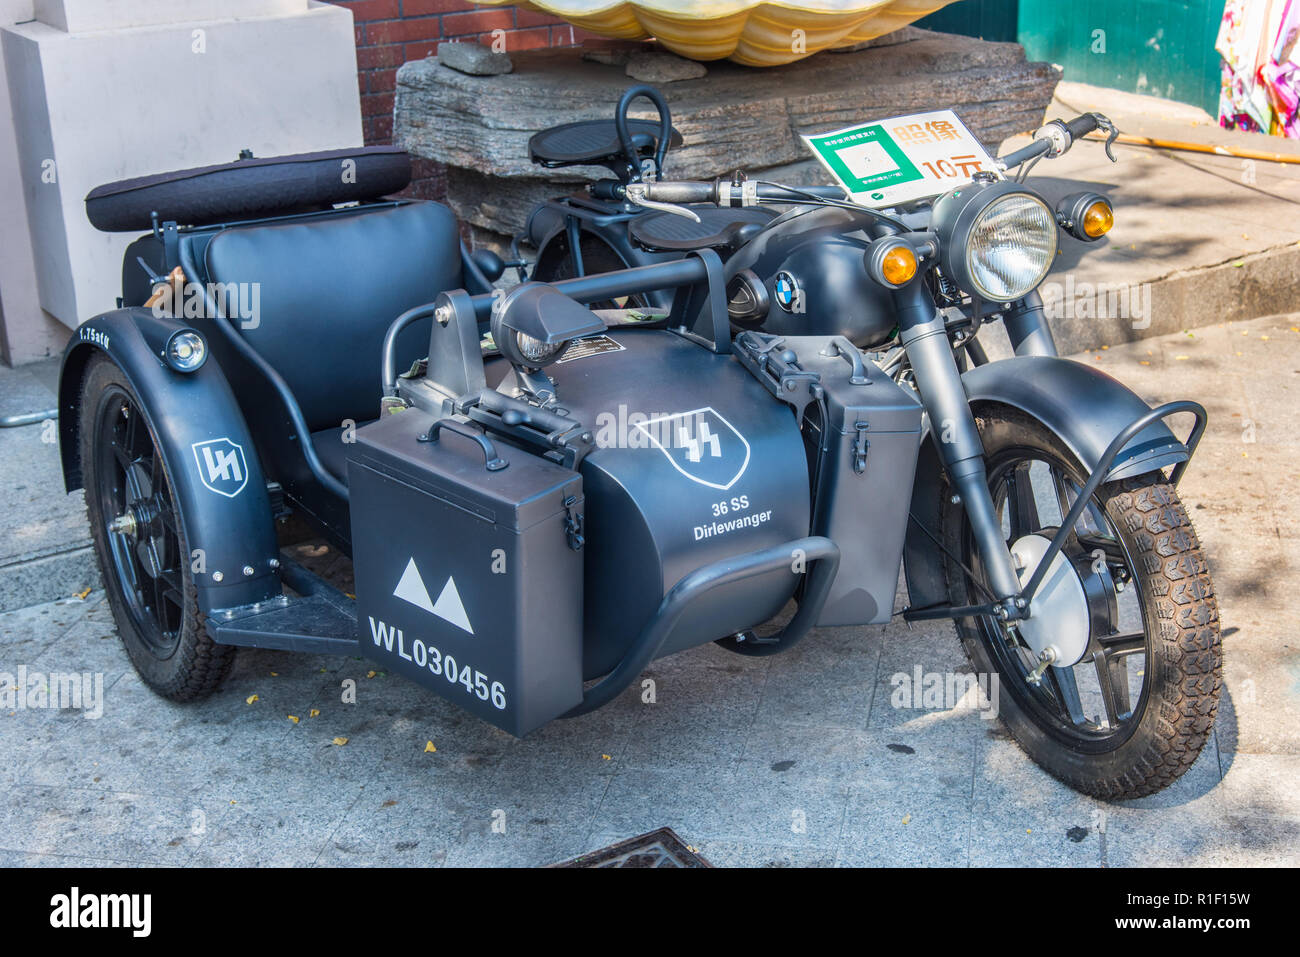 DALIAN, LIAONING, CHINA - 22JUL2018: BMW motor bike and sidecar, in the livery of the Dirlewanger Brigade a notorious unit of the Waffen SS. Provenanc Stock Photo